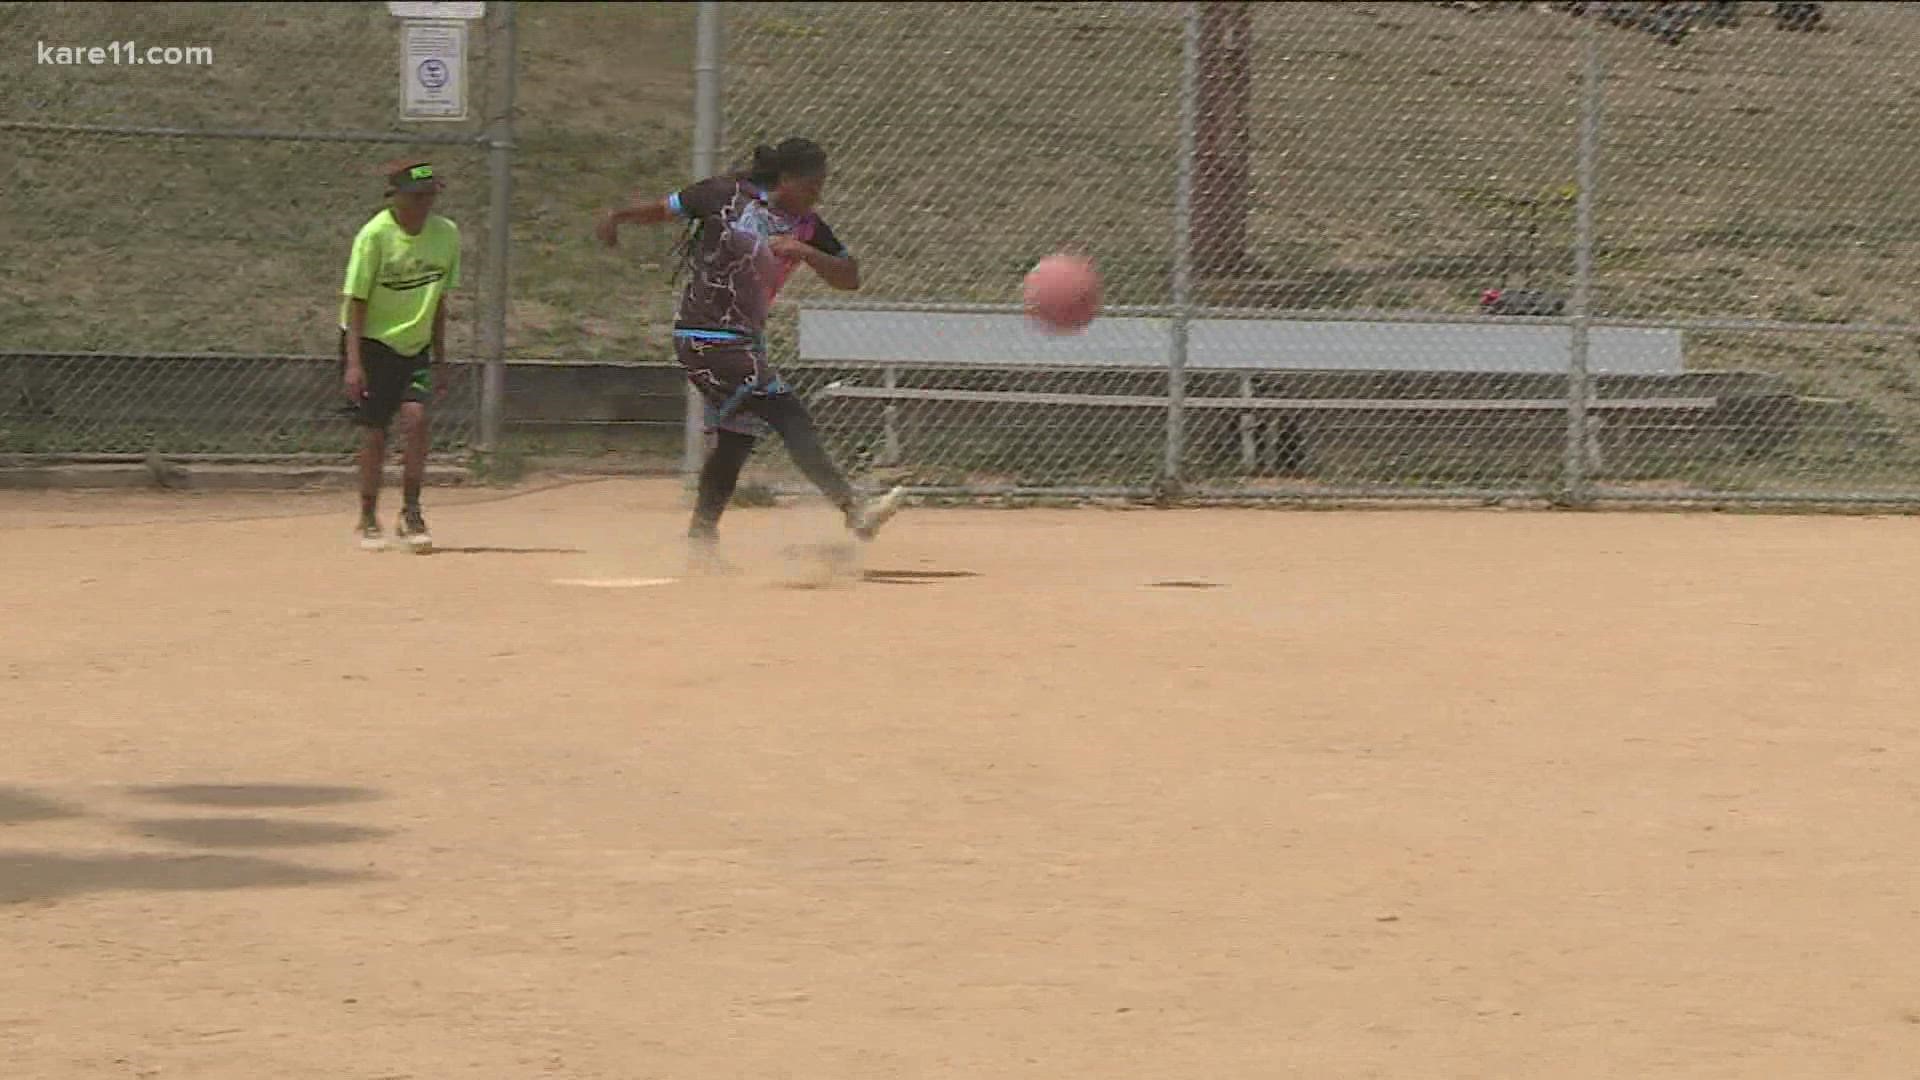 In "Communities that KARE," we visit the playing fields at Folwell Park where a kickball league epitomizes "work hard, play hard" for the north side.